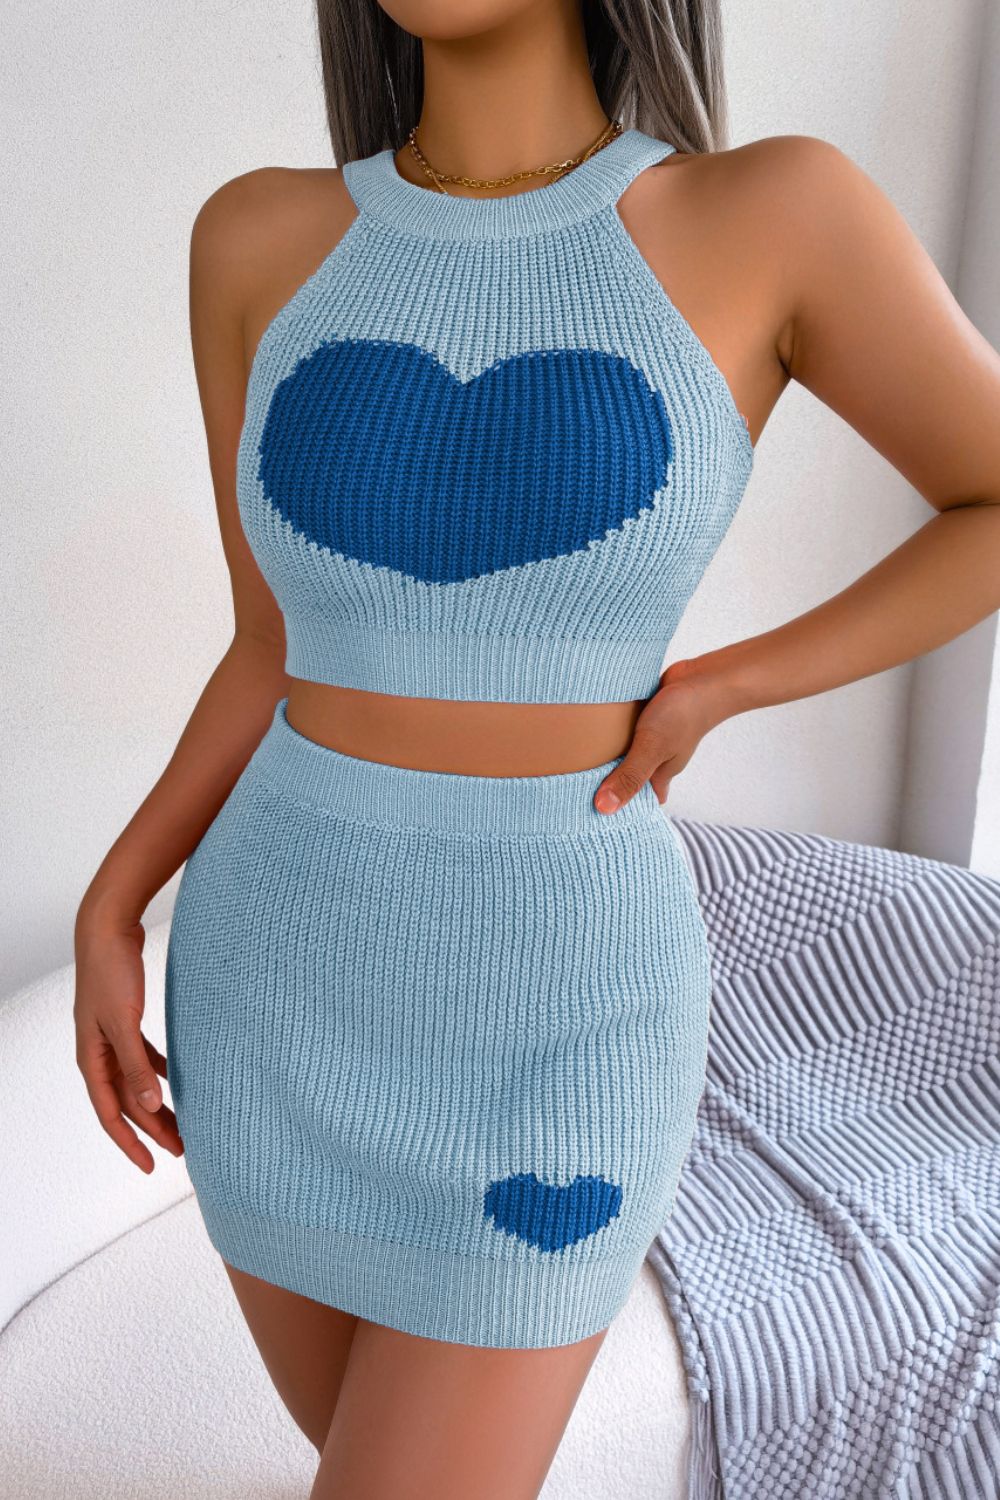 Heart Contrast Ribbed Sleeveless Knit Top and Skirt Set